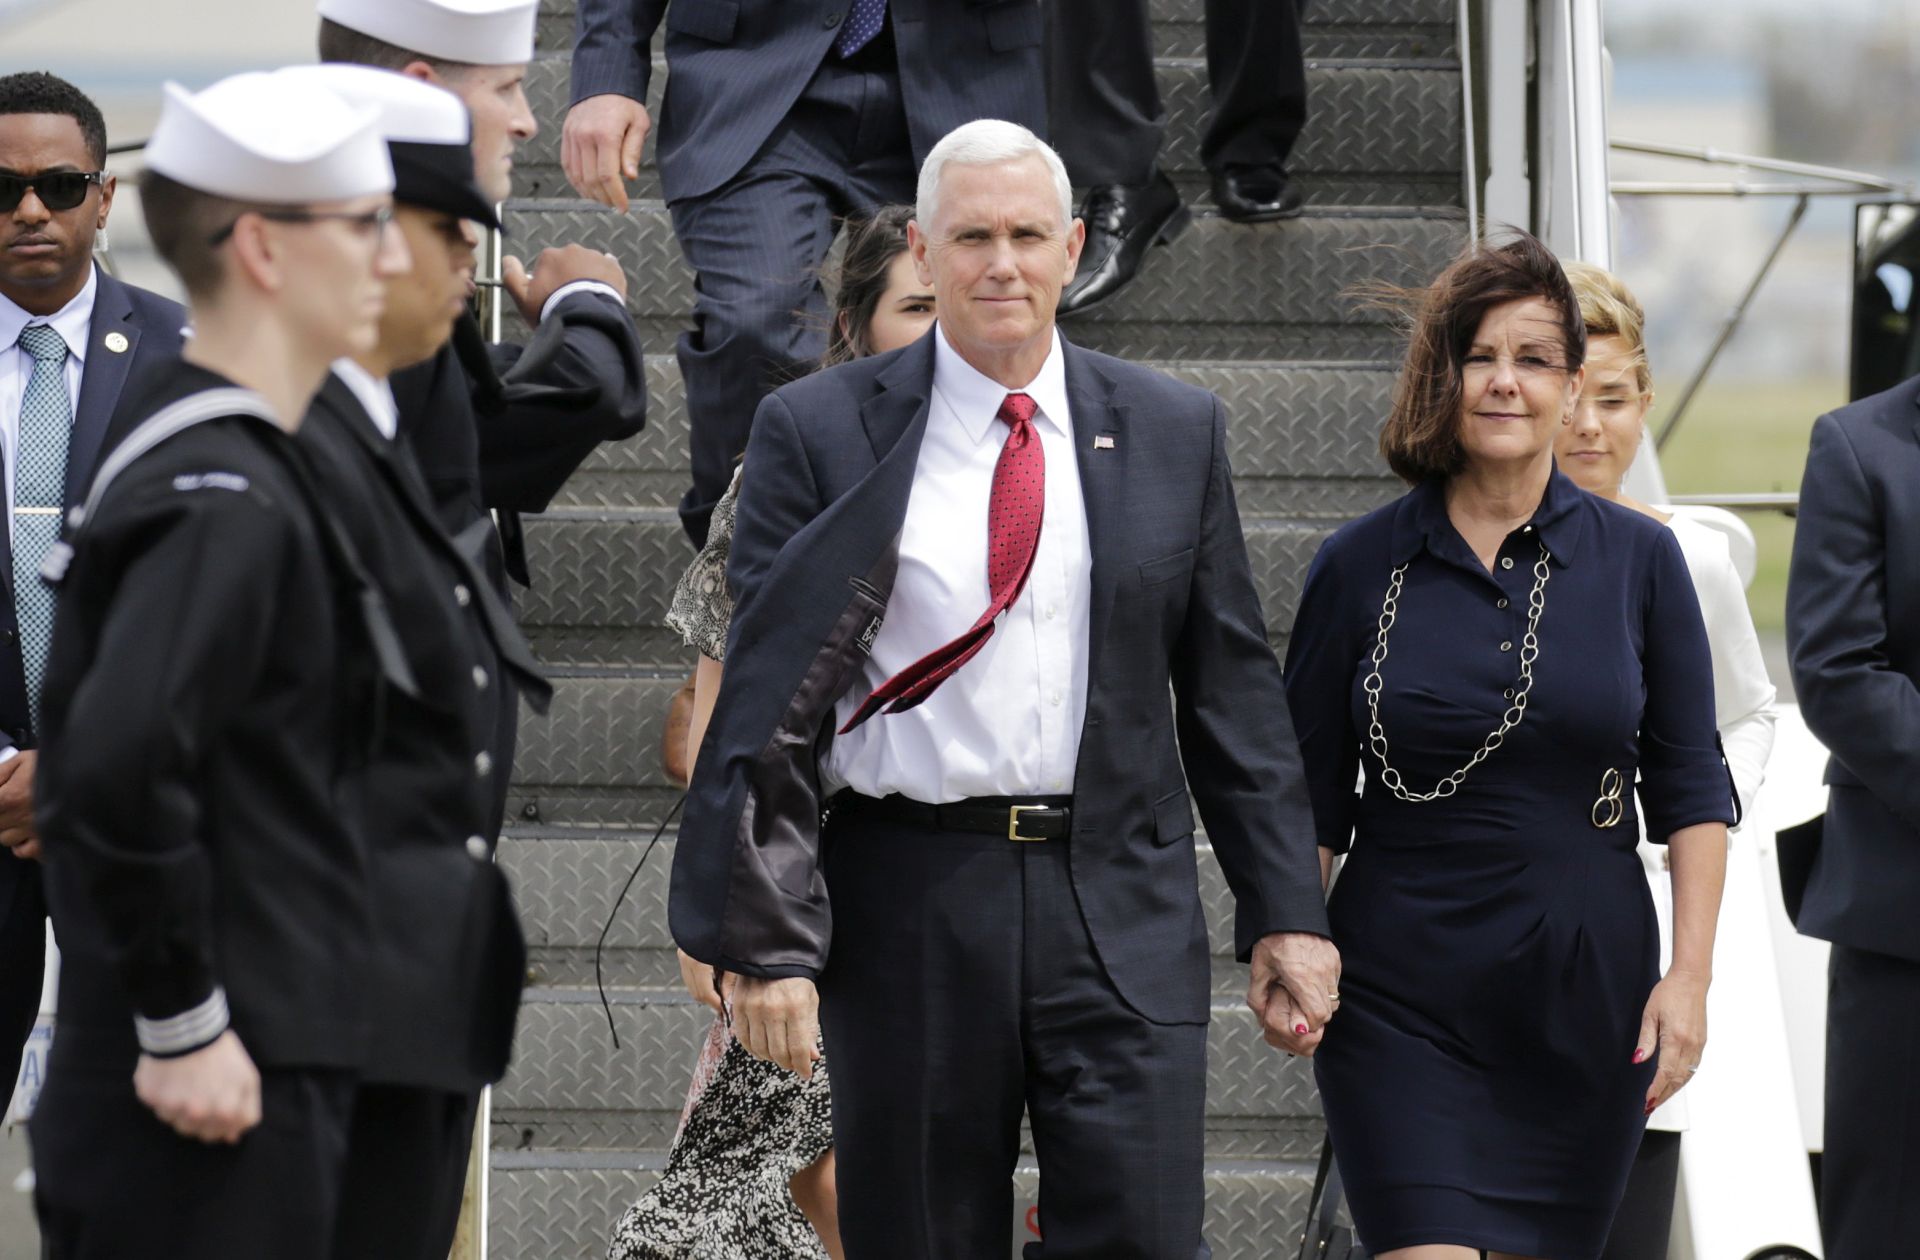 epa05912975 US Vice President Mike Pence (C) and his wife Karen Sue Pence (R) are welcomed by US Naval servicepersons upon their arrival at US Naval Air Facilities Atsugi in Ayase, Kanagawa Prefecture, southwest of Tokyo, Japan, 18 April 2017. Pence is on a tour of east Asia and will visit South Korea, Japan and China amid tensions over nuclear issues in the Korean Peninsula.  EPA/KIMIMASA MAYAMA